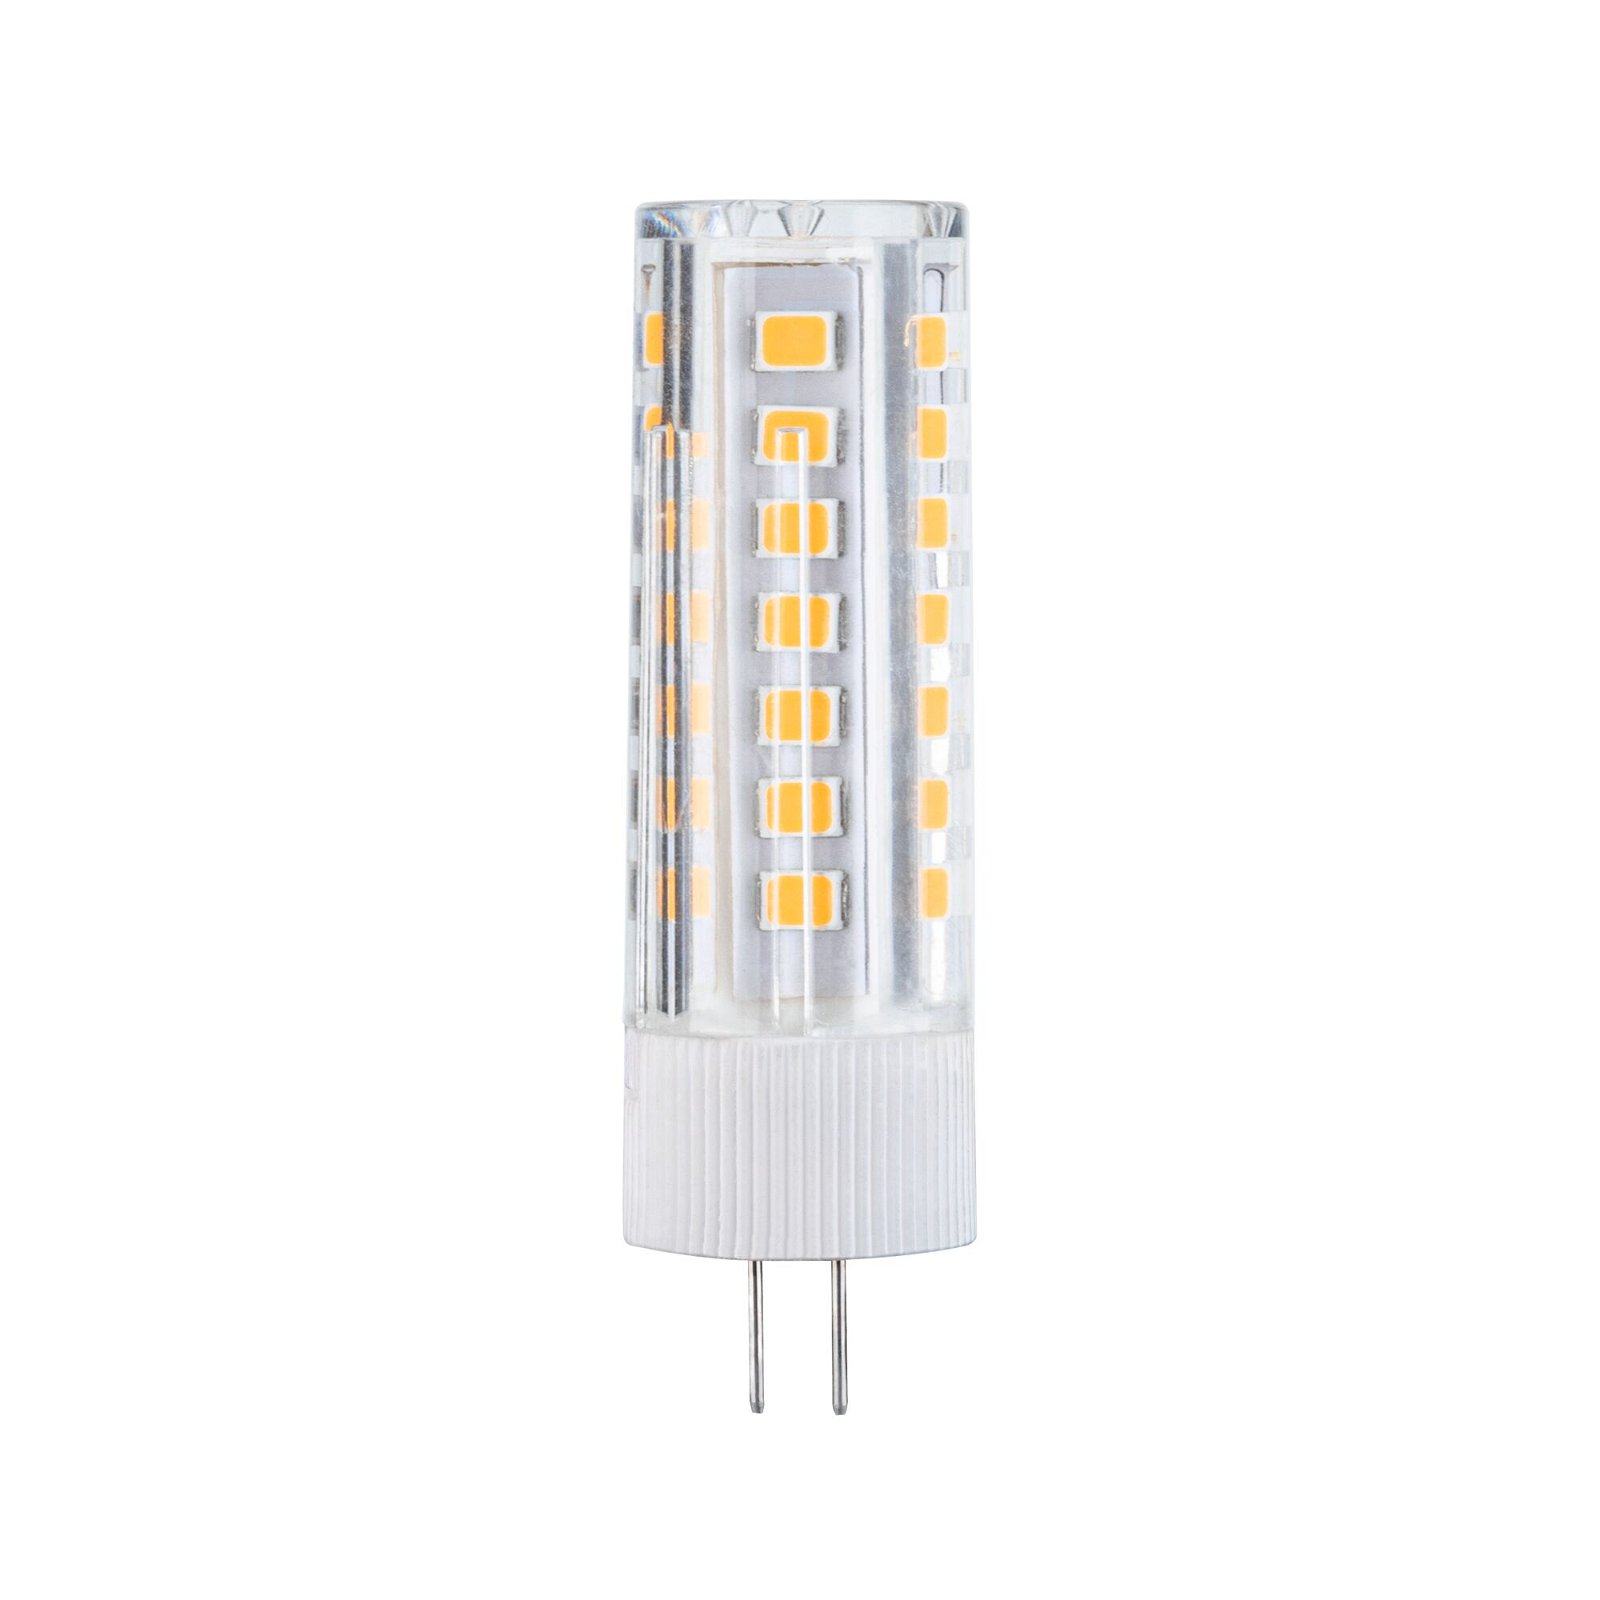 G4 Base Side-Pin 3-LED Disc Type Bulb with Heat Sink (6-Pack